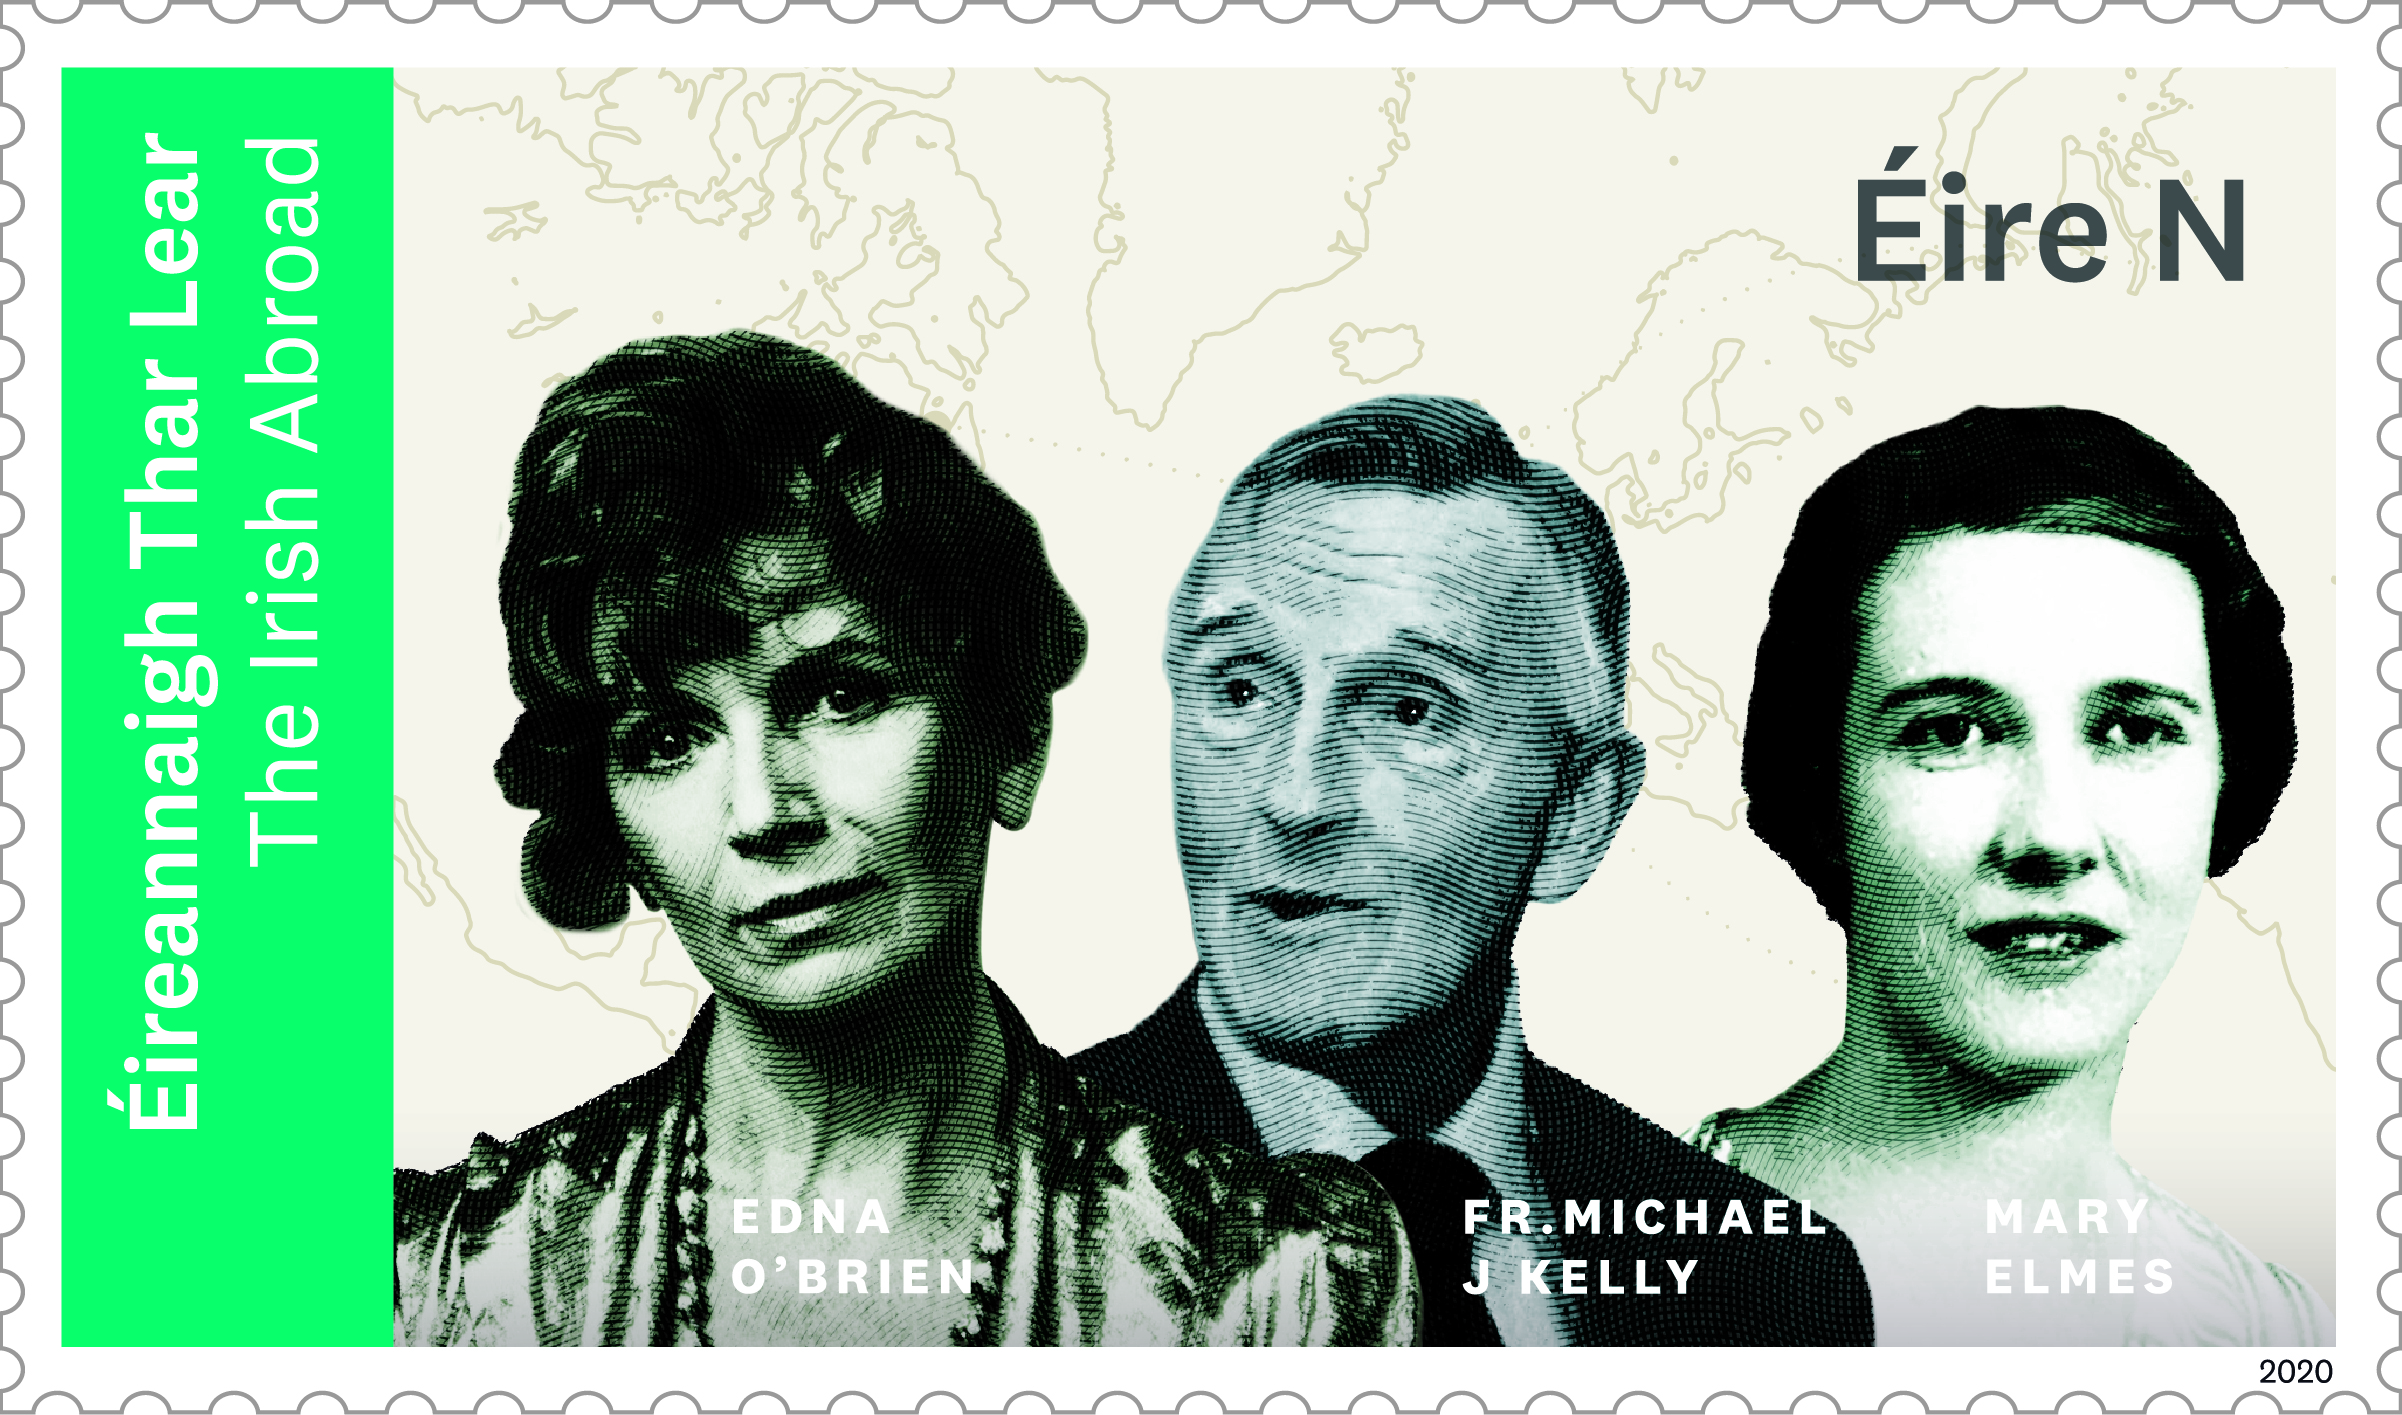 An Post 2020 special edition diaspora postage stamp depicting famous emigrants